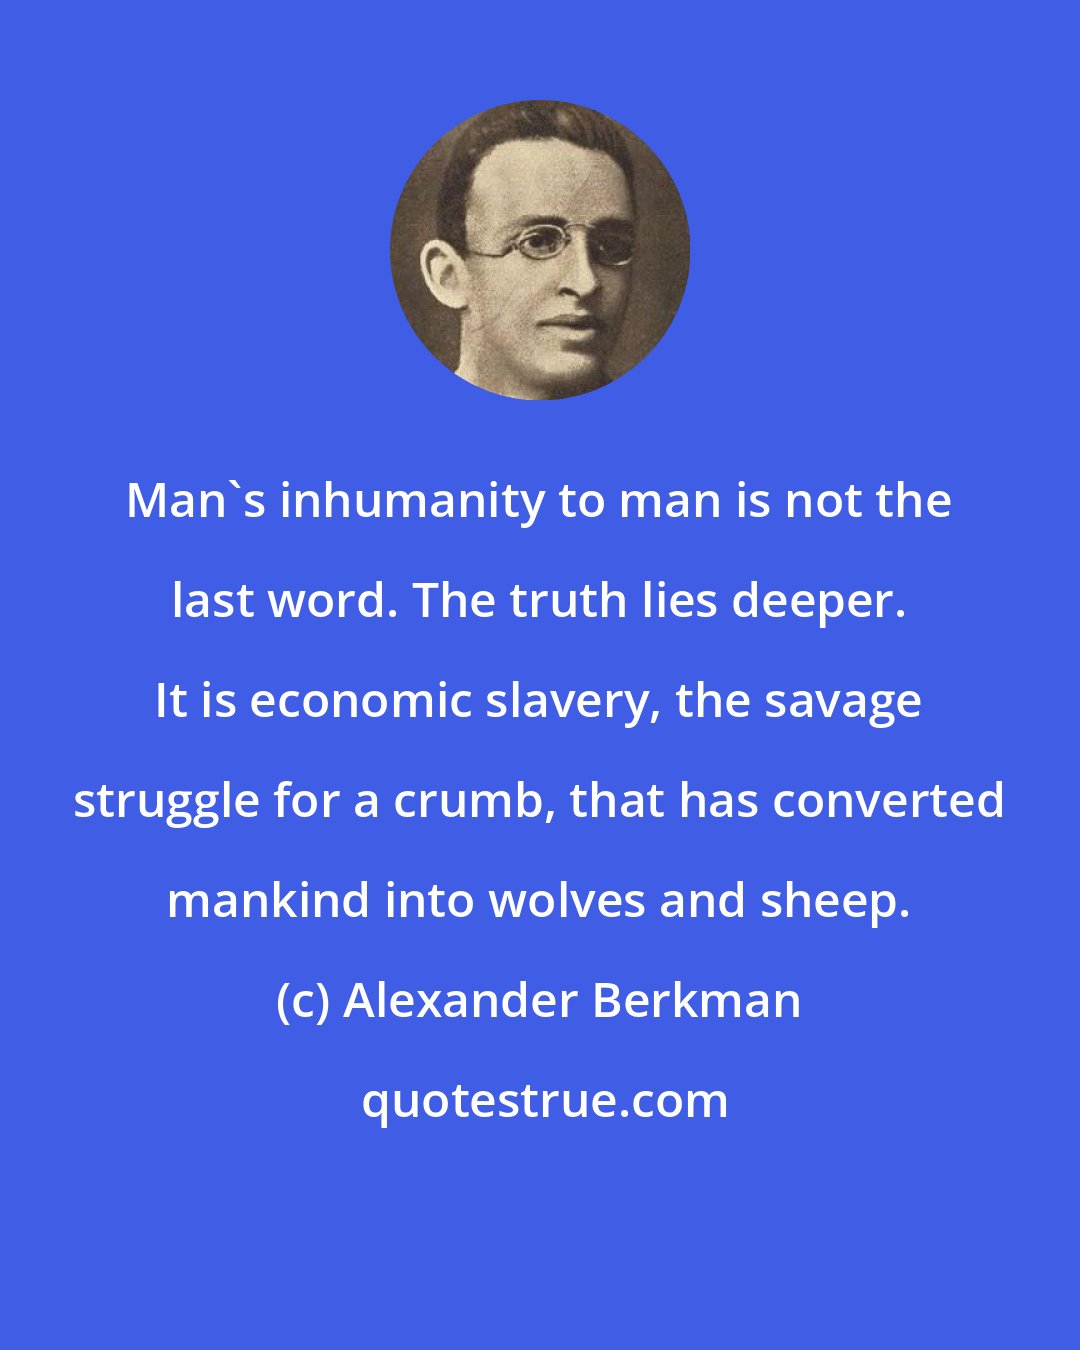 Alexander Berkman: Man's inhumanity to man is not the last word. The truth lies deeper. It is economic slavery, the savage struggle for a crumb, that has converted mankind into wolves and sheep.